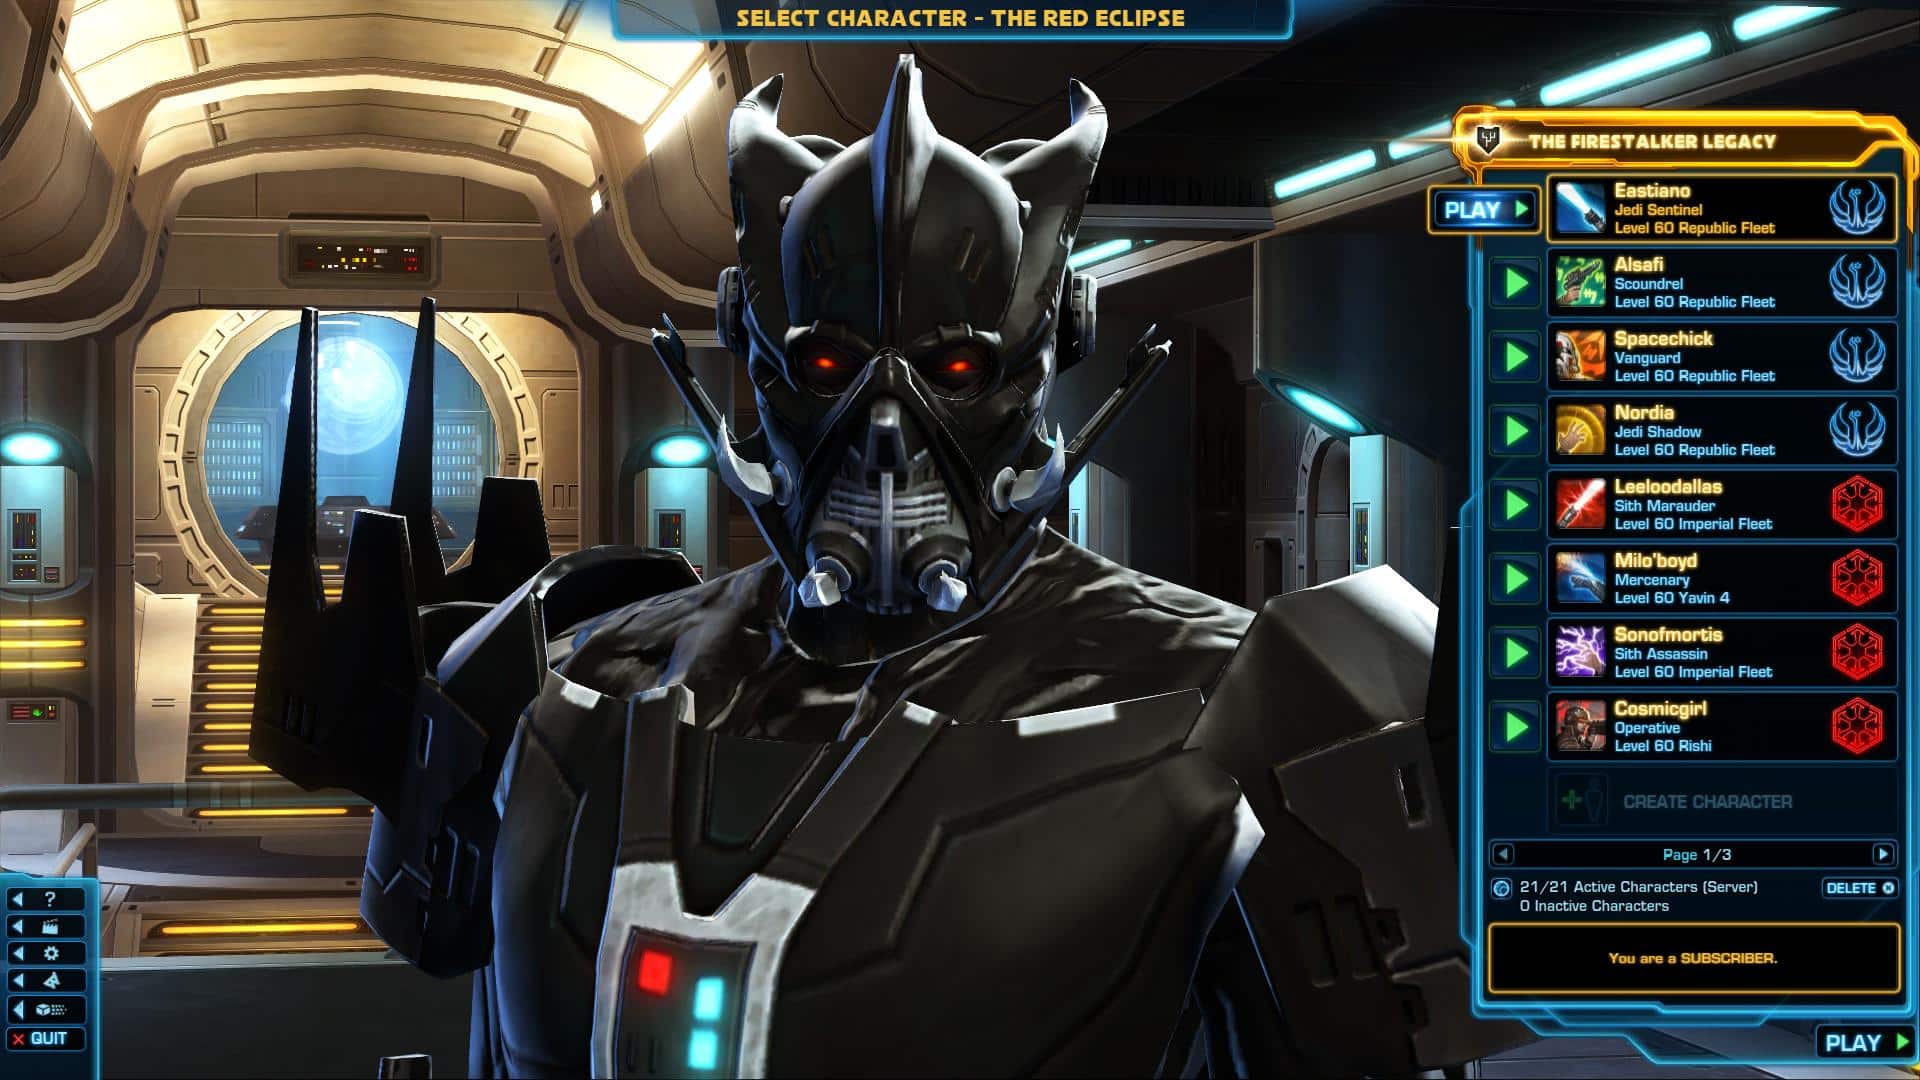 Upcoming PvP Changes comming to SWTOR